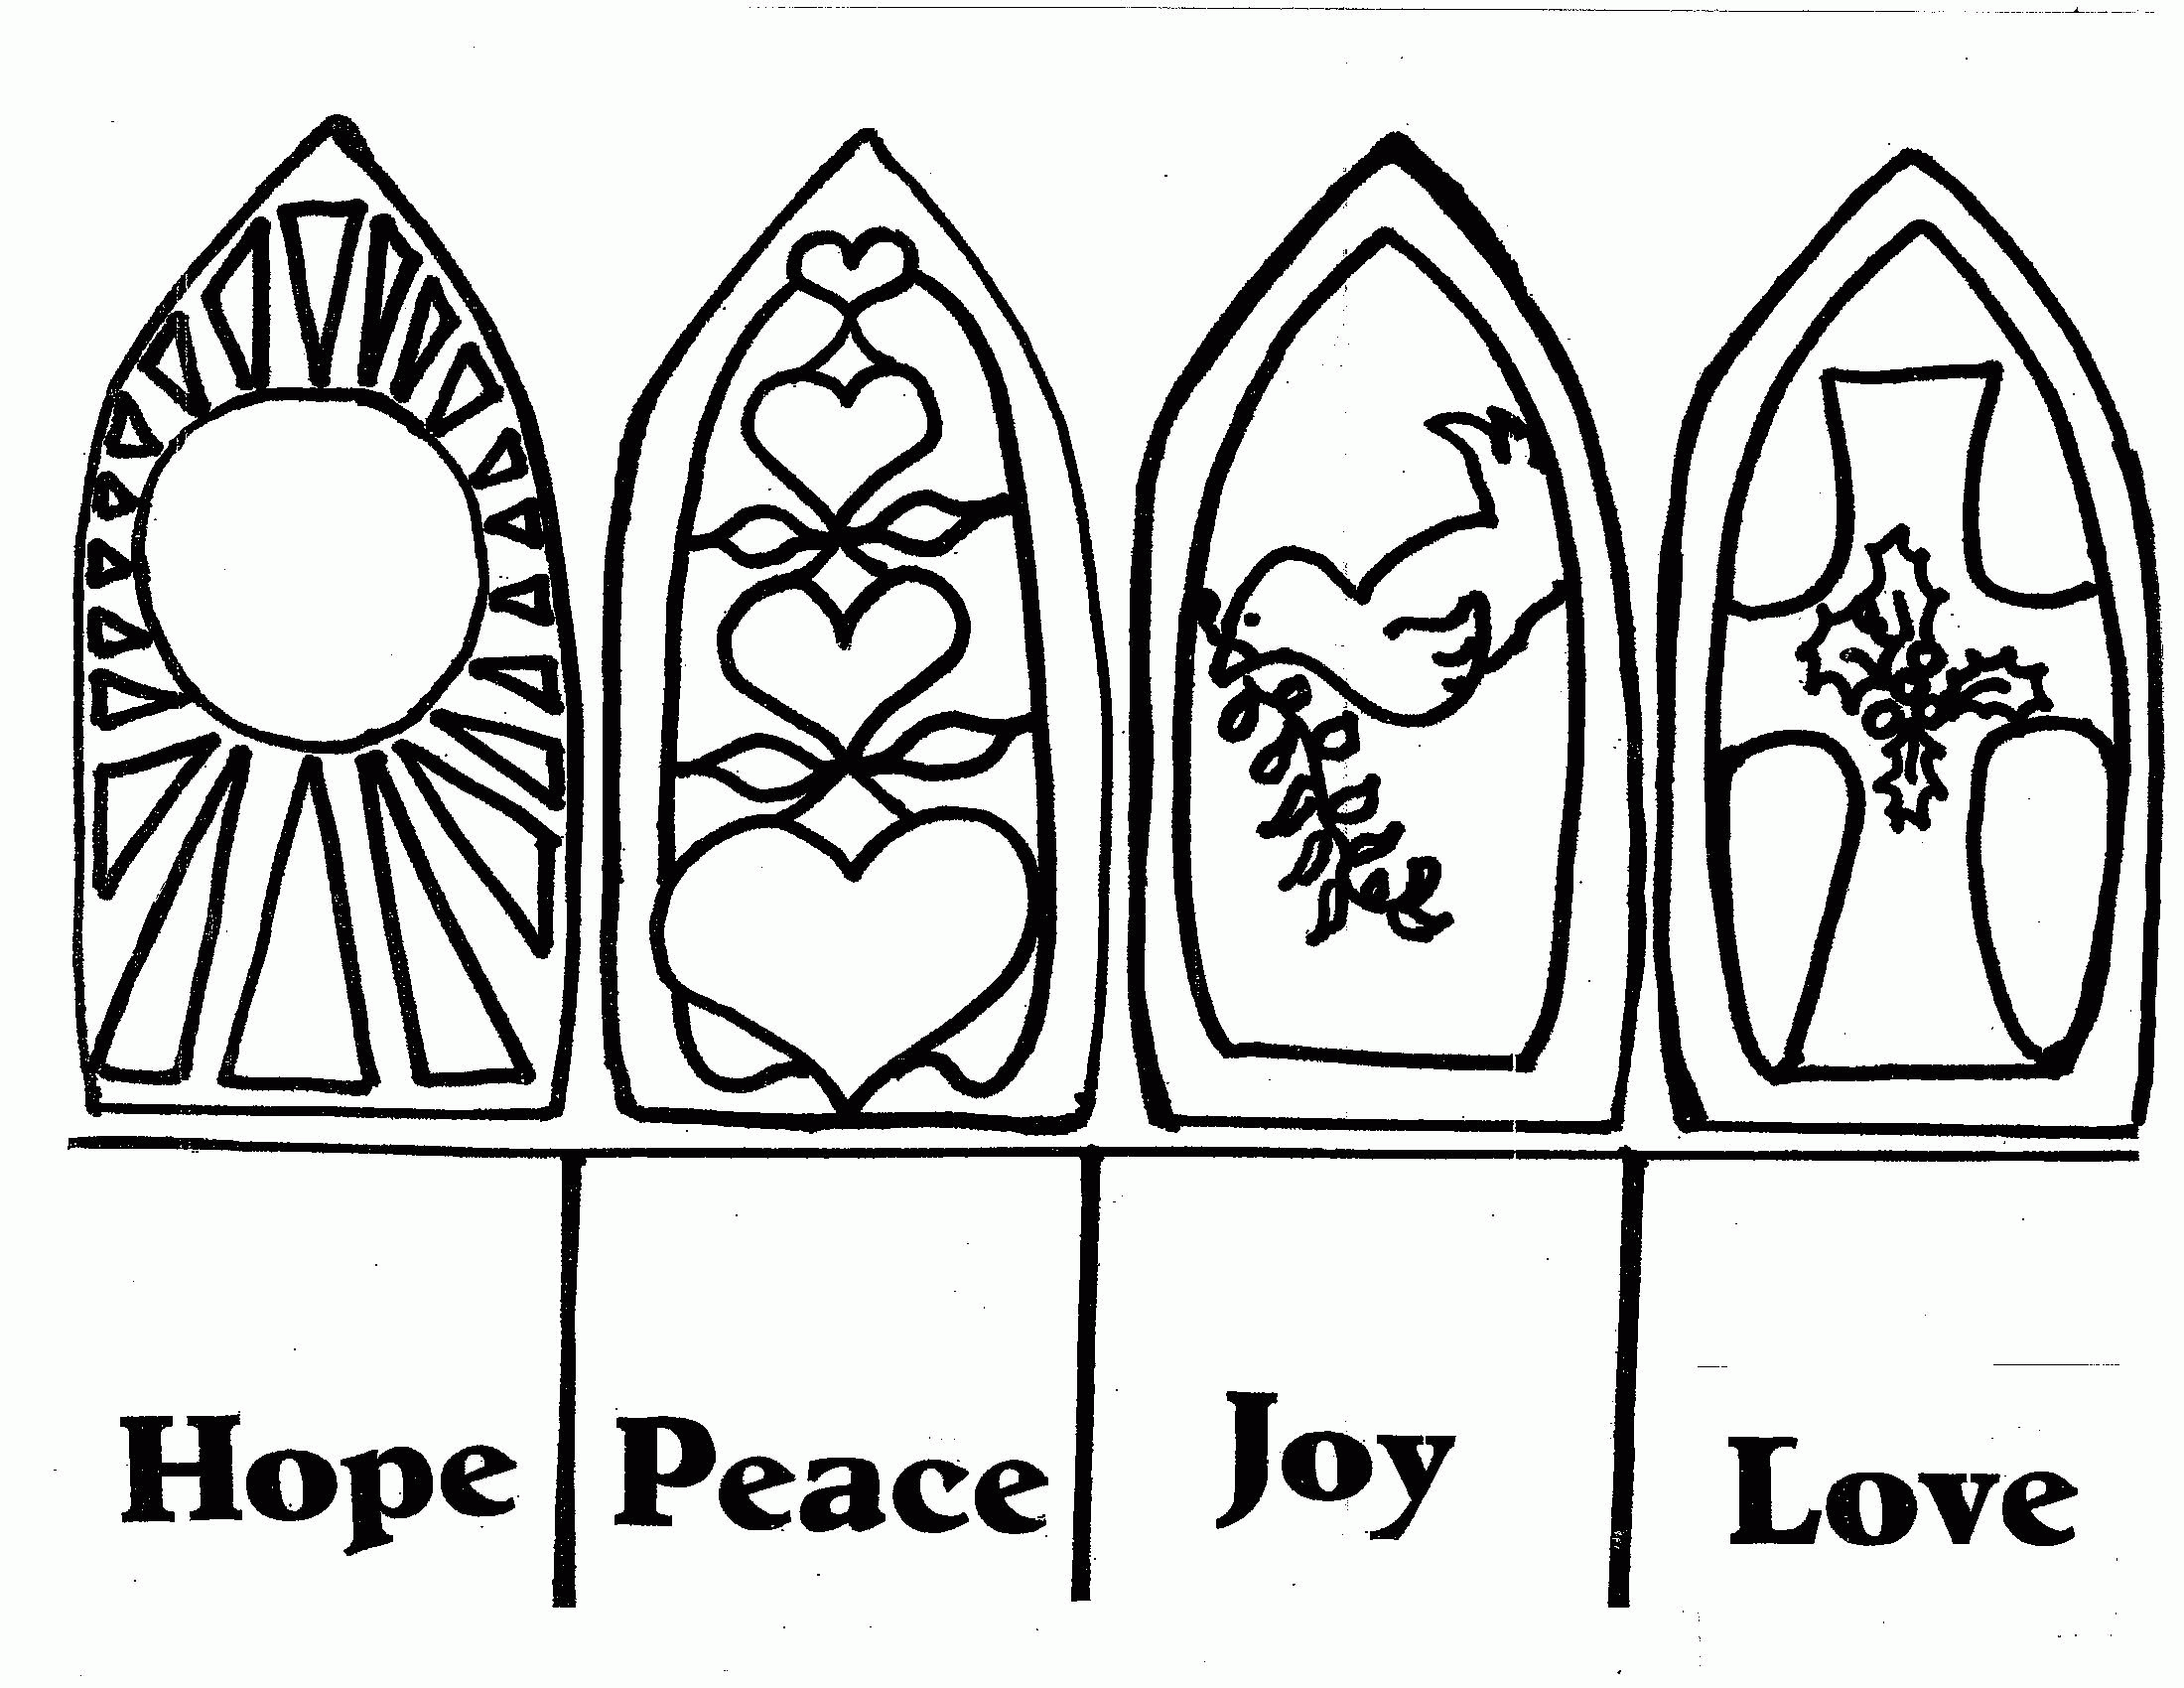 Kindergarten Free Coloring Pages Of Advent Wreath Candles - Widetheme